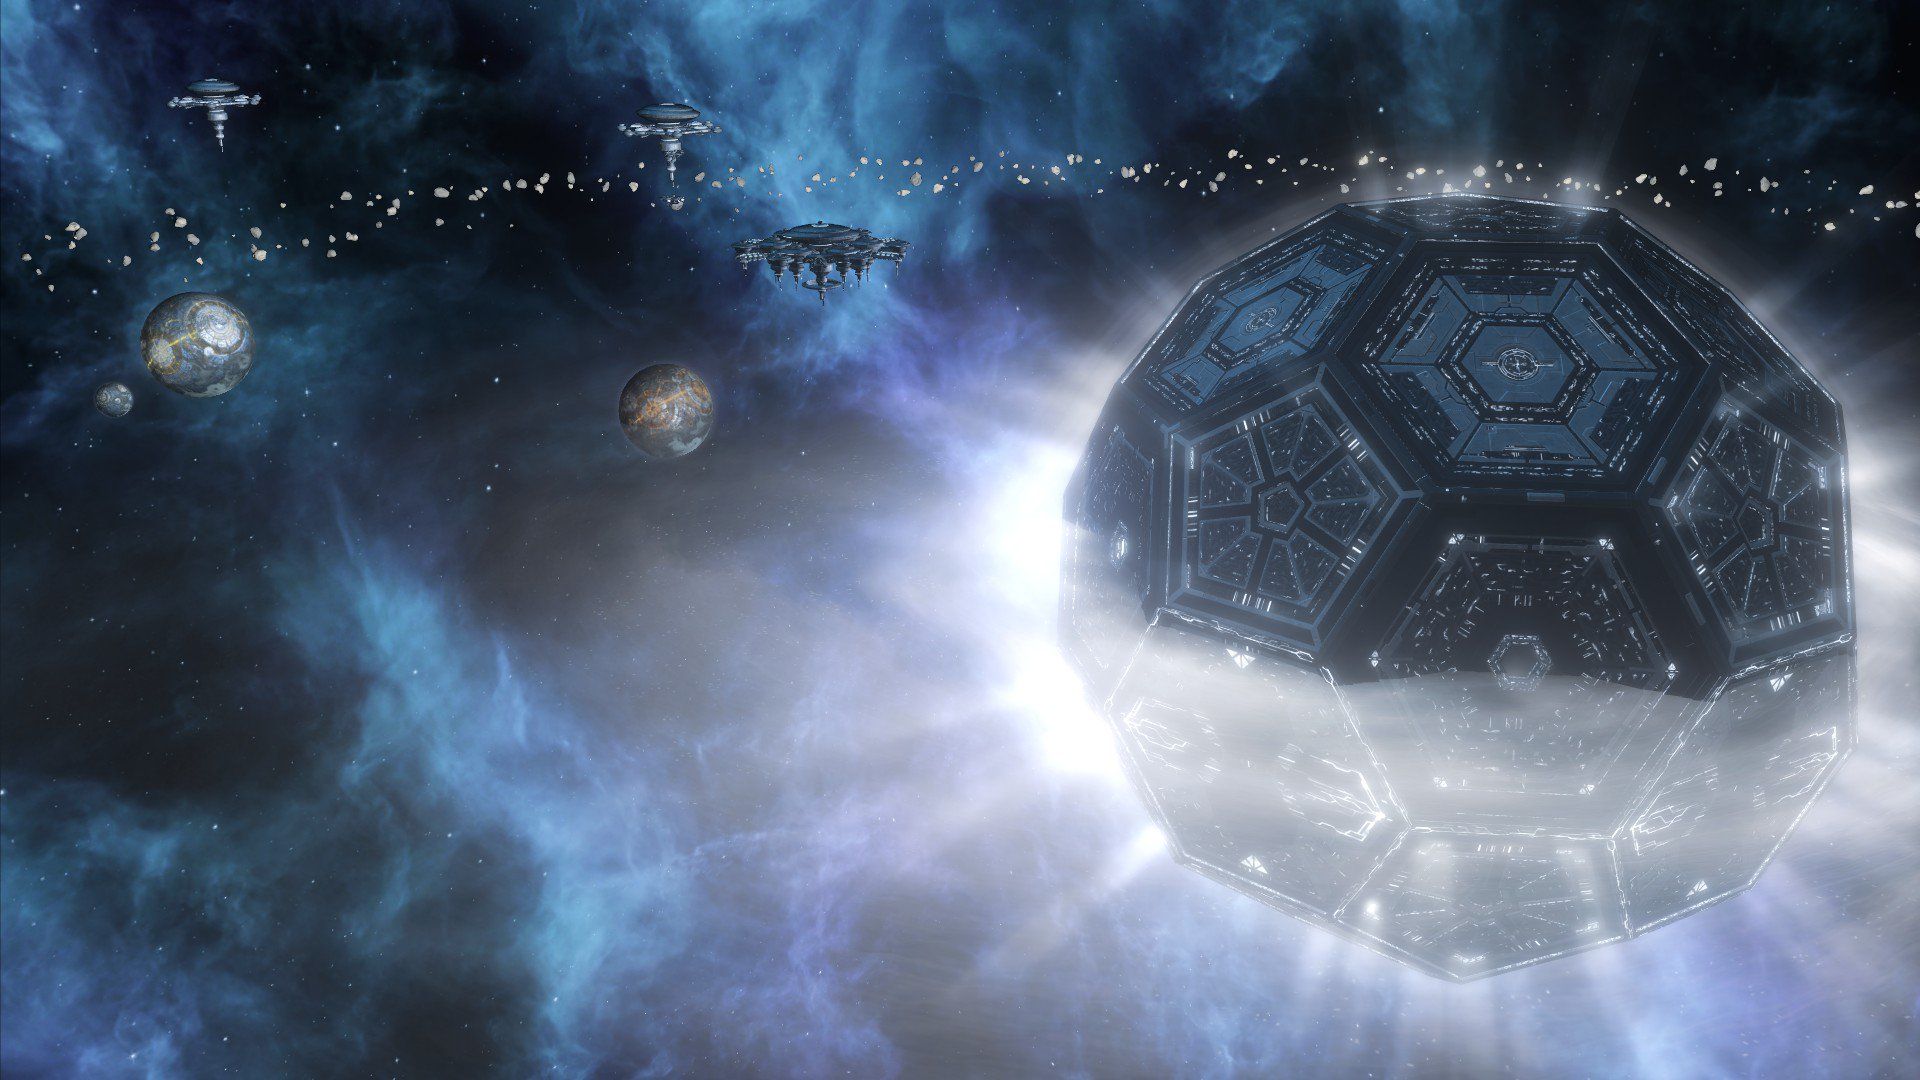 Dyson Sphere Wallpapers - Wallpaper Cave